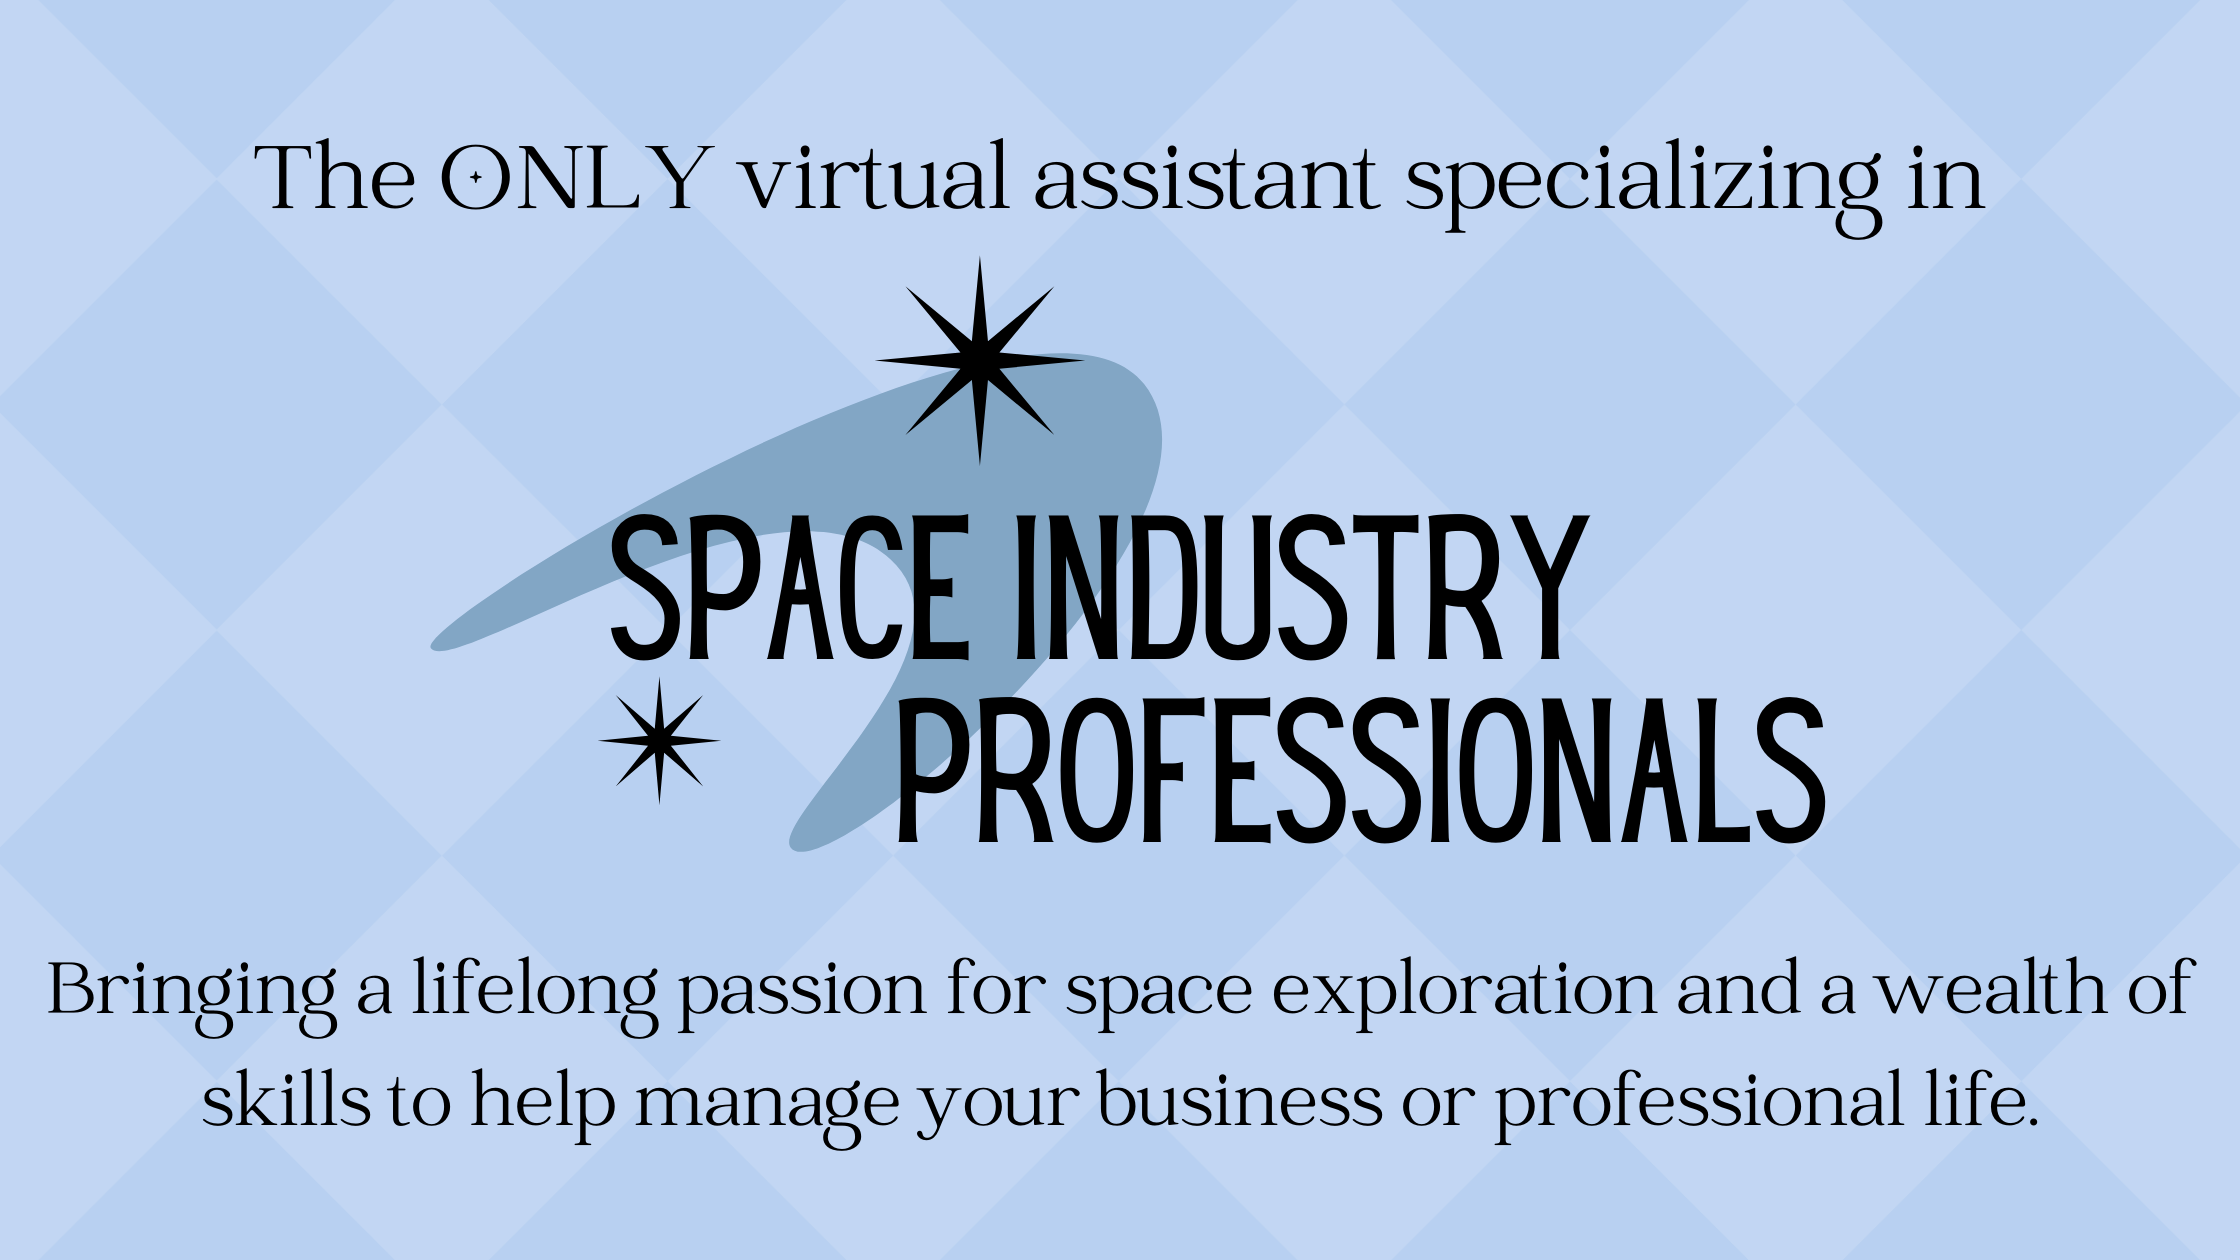 Image contains a light blue diamond background with black text that reads "The ONLY virtual assistant specializing in space industry professionals.  Bringing a lifelong passion for space exploration and a wealth of skills to help manage your business or professional life." There is also a grey-blue midcentury style boomerang graphic and two black midcentury style starbursts.